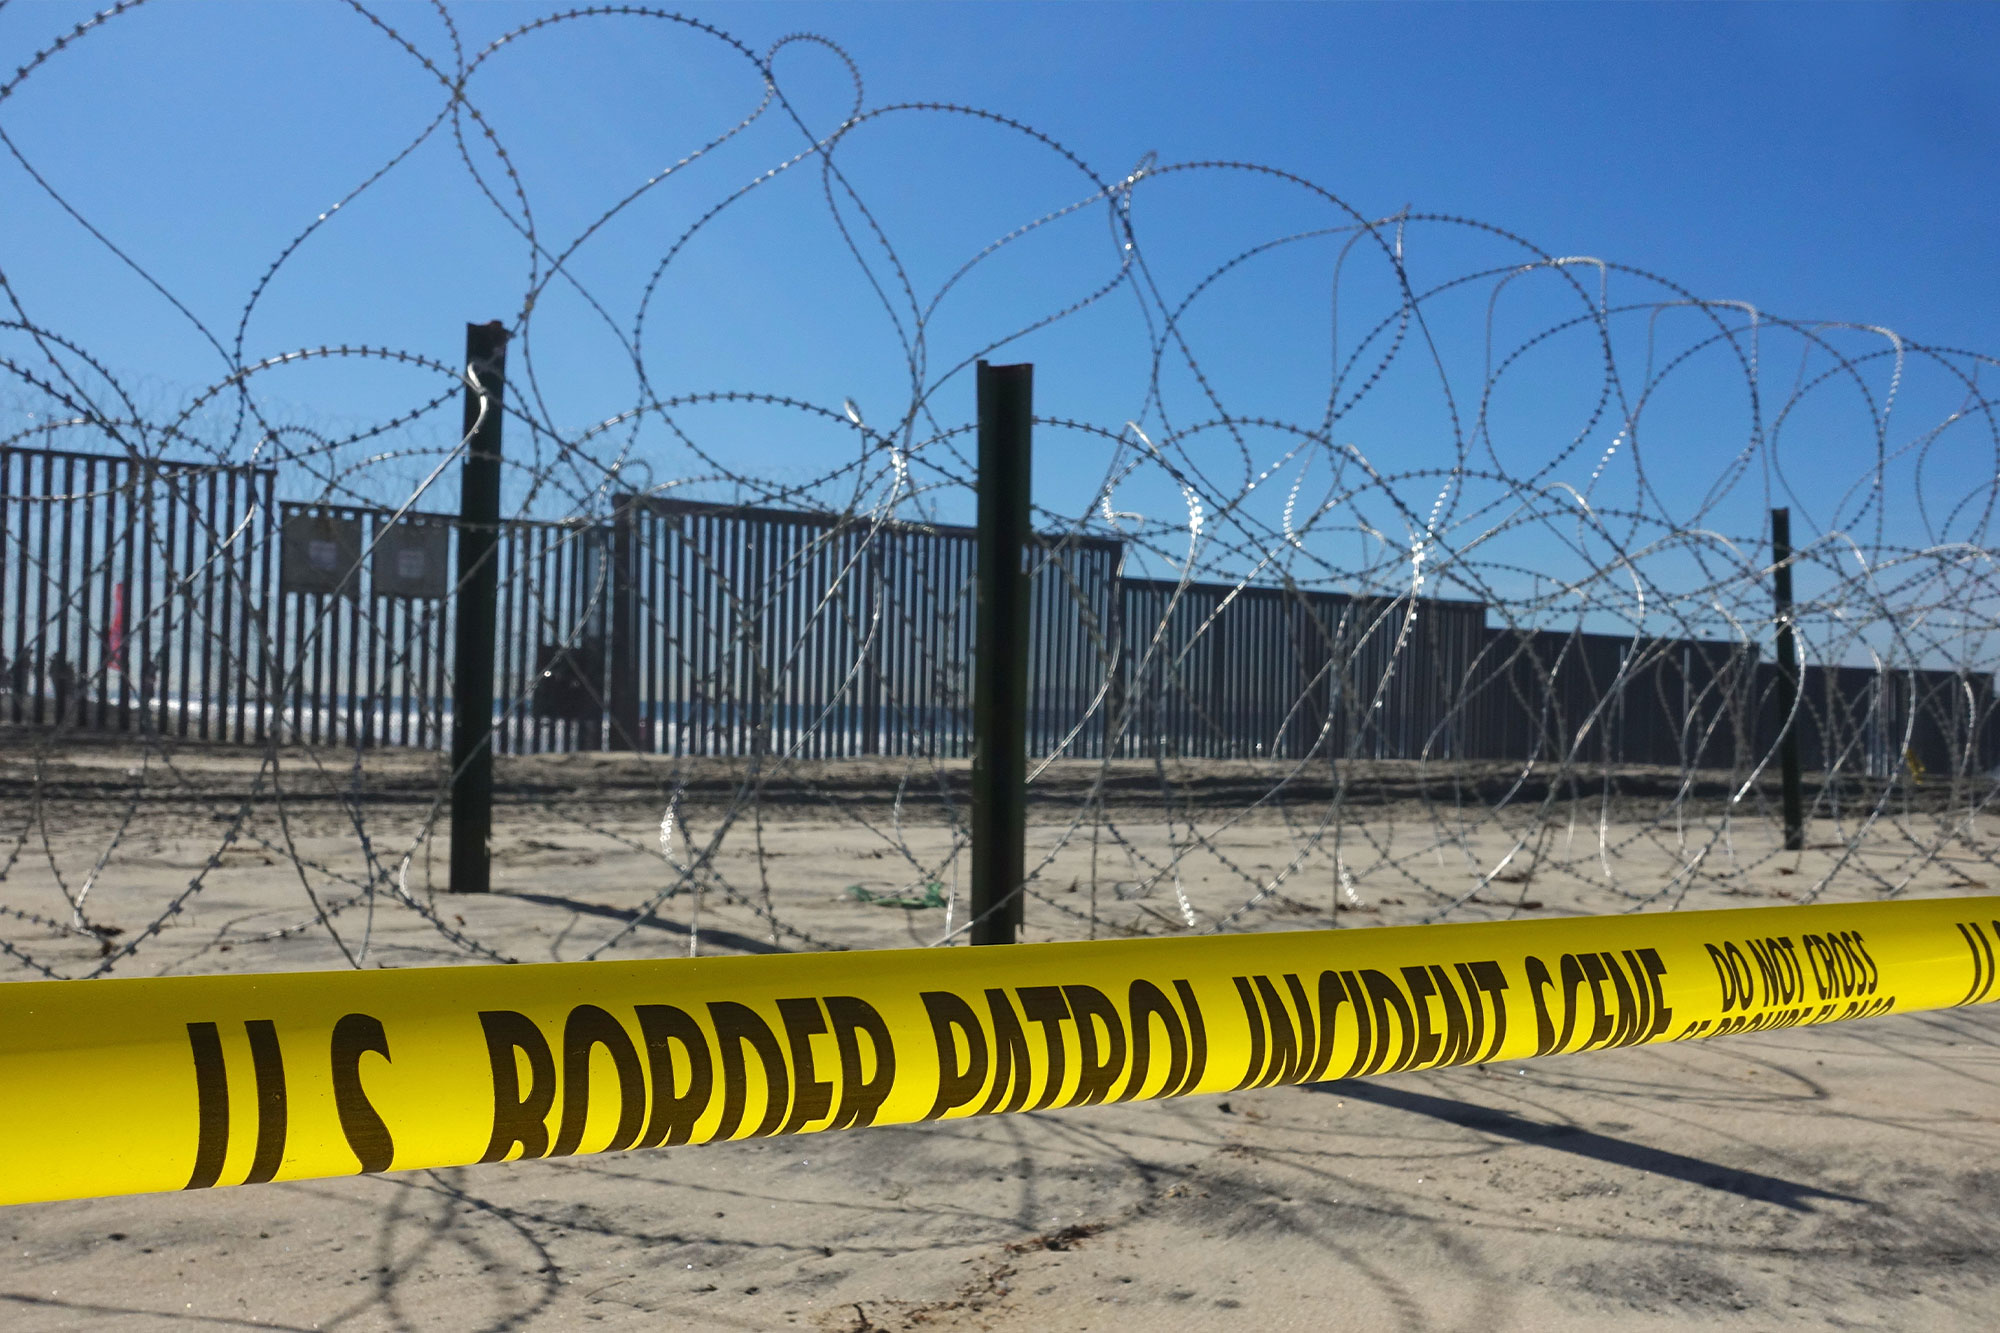 7-YEAR DELAY IN BORDER PATROL USE-OF-FORCE CASE IS EMBLEMATIC OF A LARGER PROBLEM